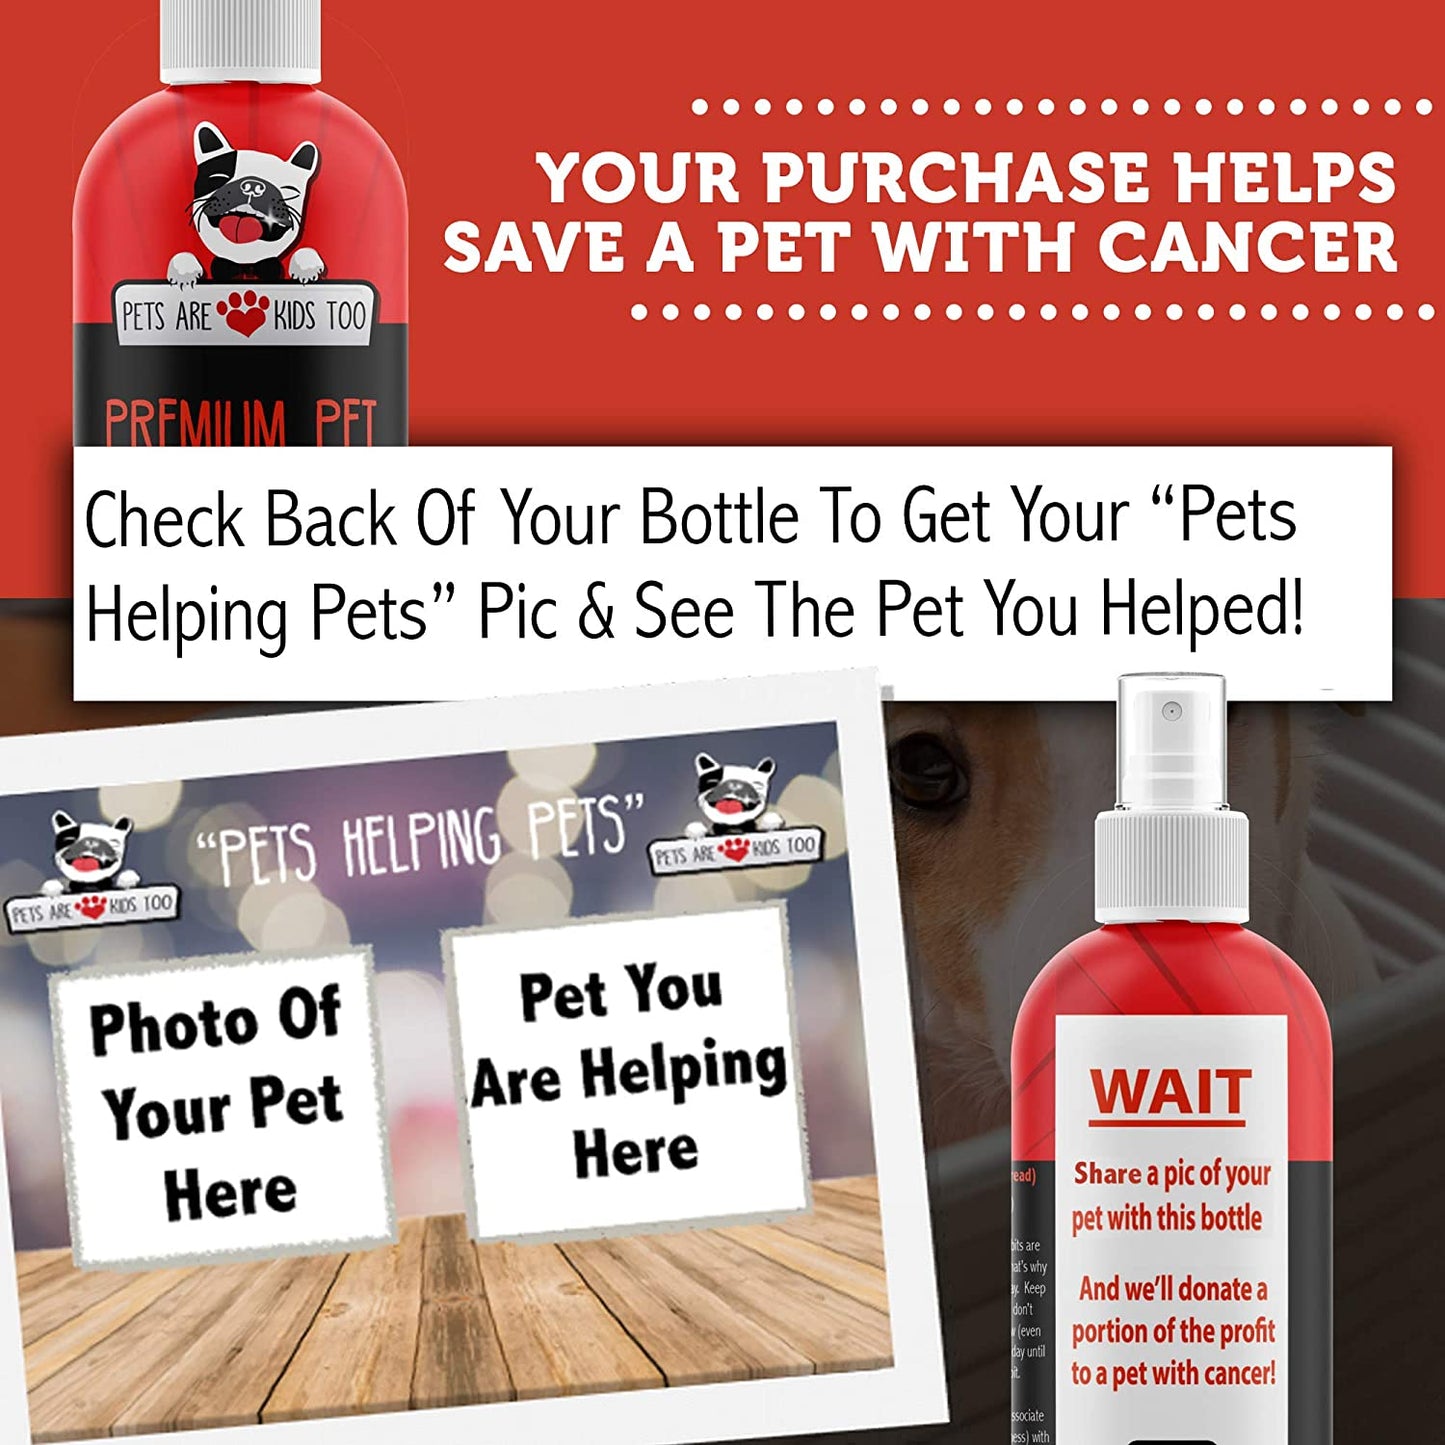 Anti Chew Dog Training Spray: No Chew Bitter Spray and Pet Deterrent for Dogs and Cats - Behavior Correction to Stop Chewing and Licking - Safe for Furniture, Paws and Bandages (1 bottle or 3 bottles) - (For 8 piece(s))